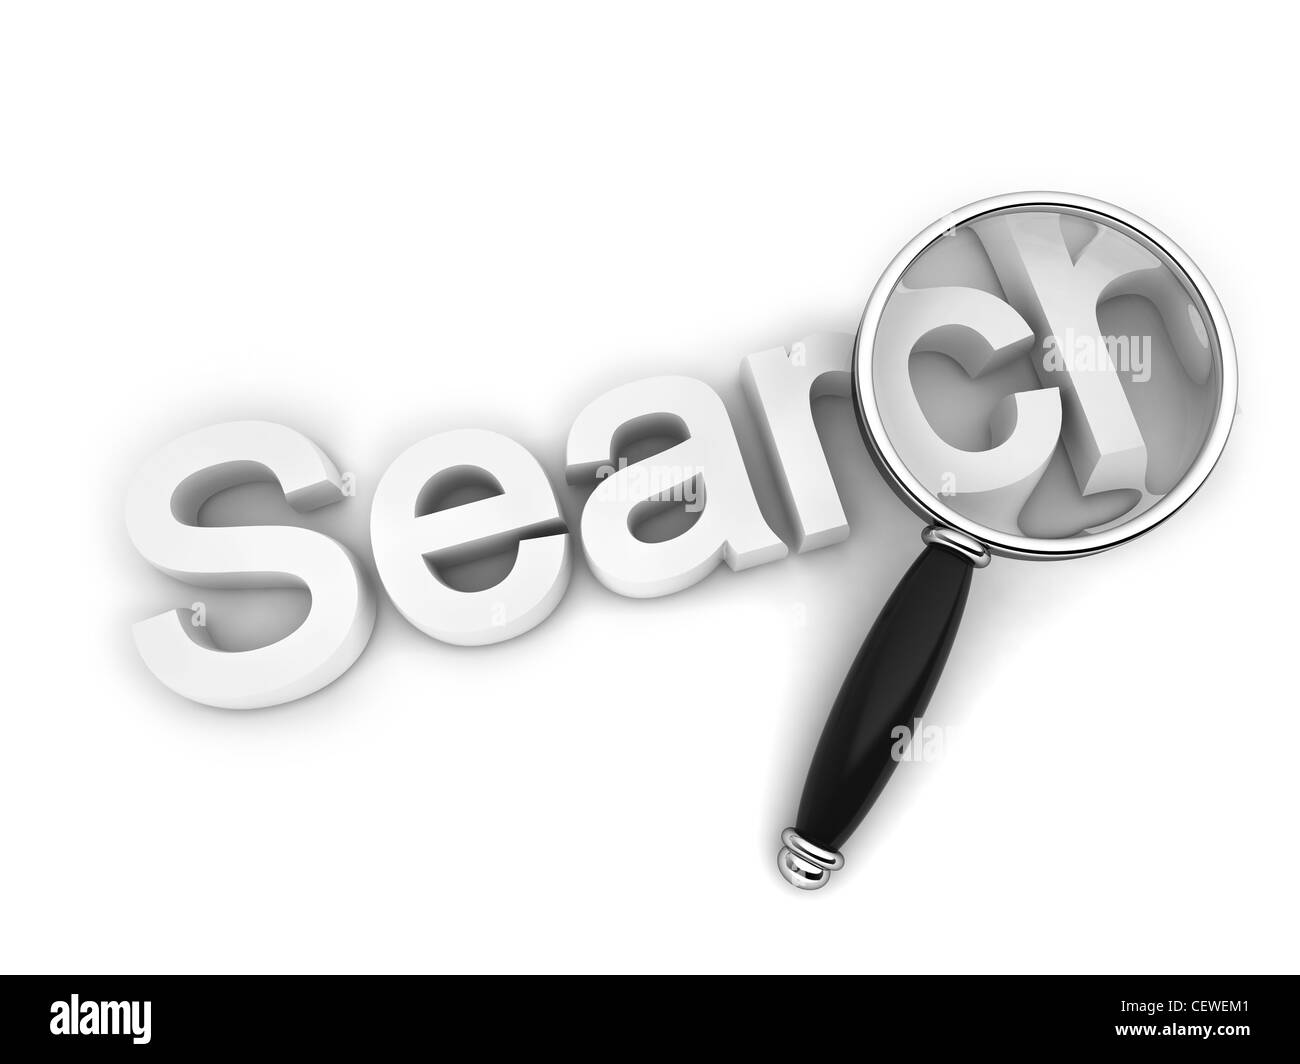 3D Text Illustration Featuring the Word Search with Magnifying glass Stock Photo